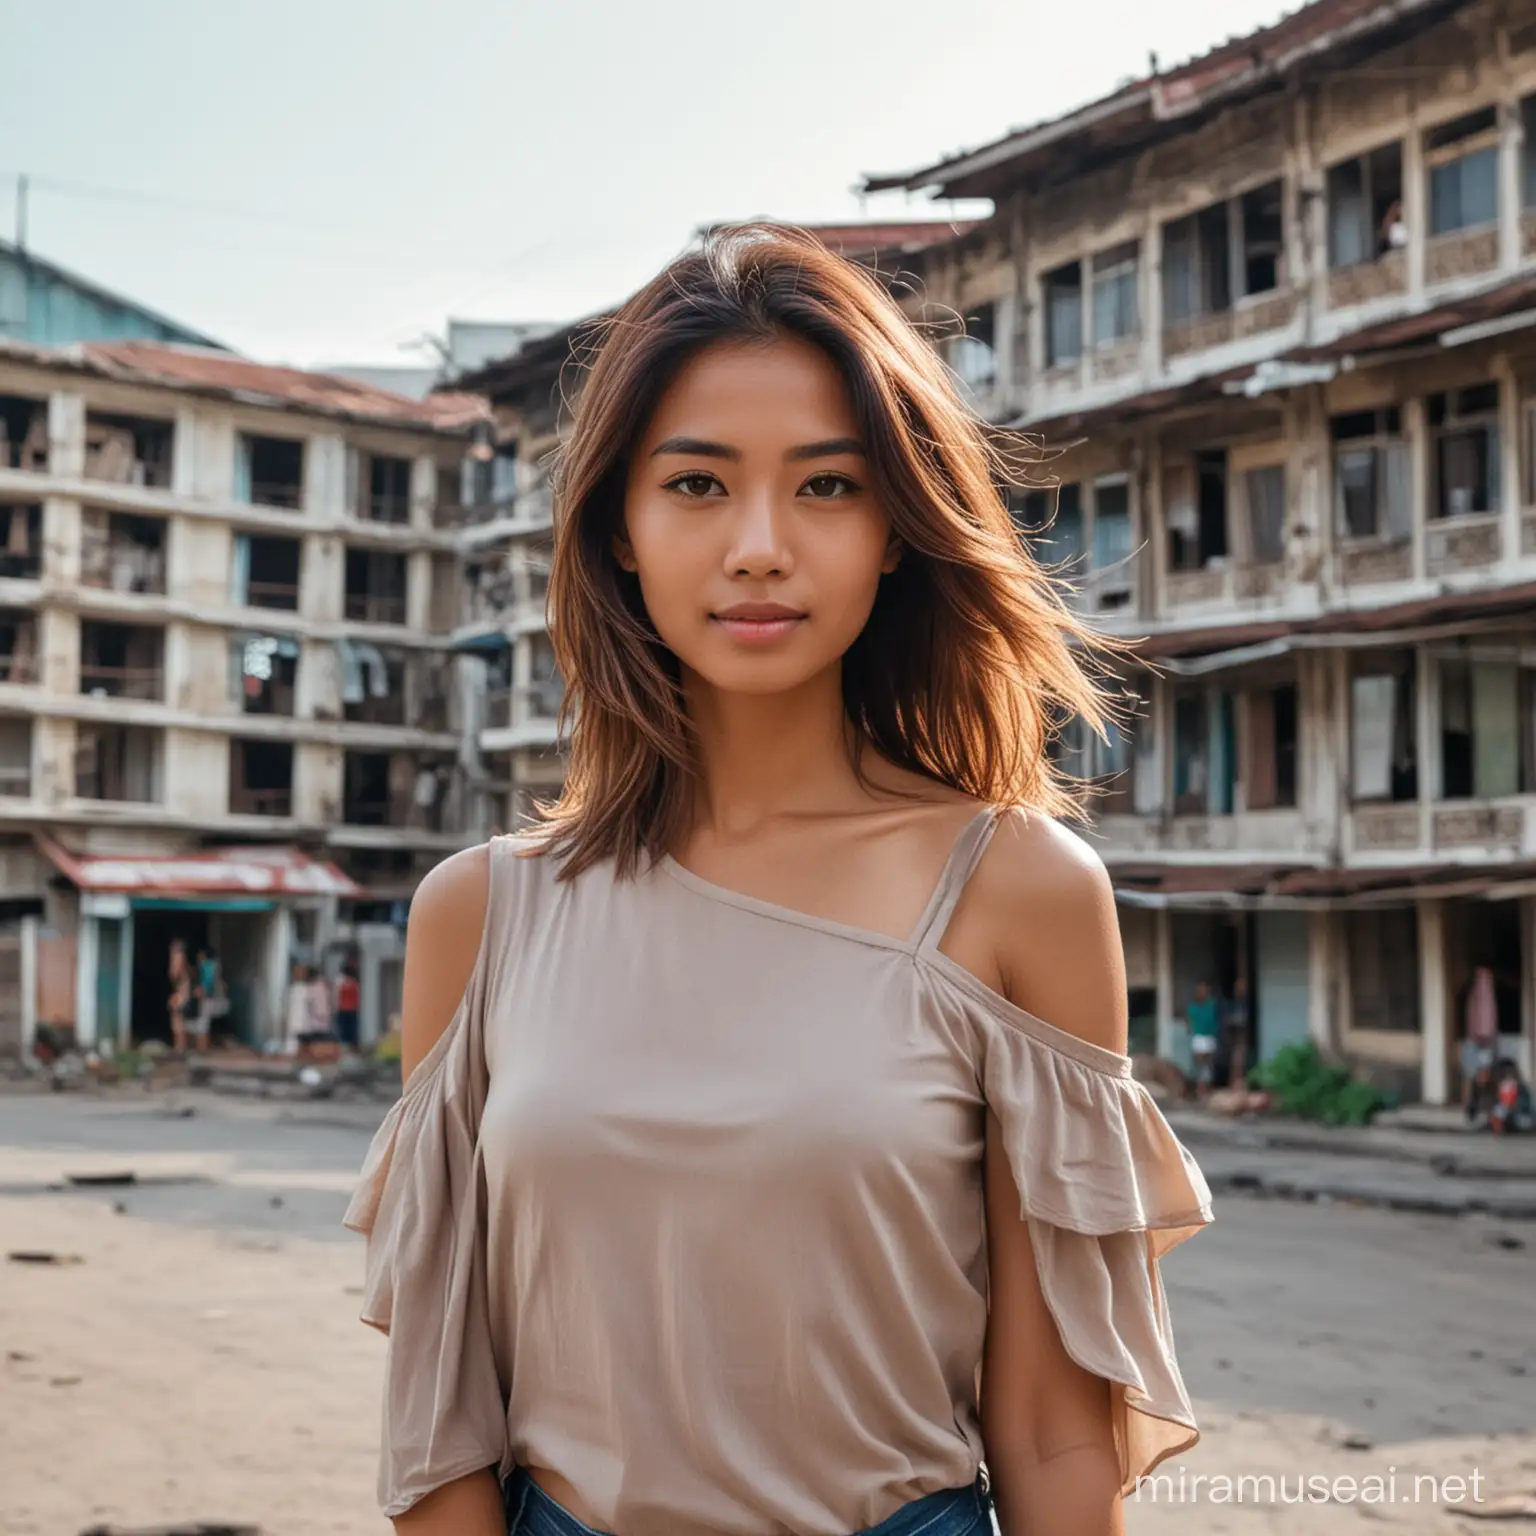 Stylish Woman with Layered Hair Posing Against Indonesian Architecture